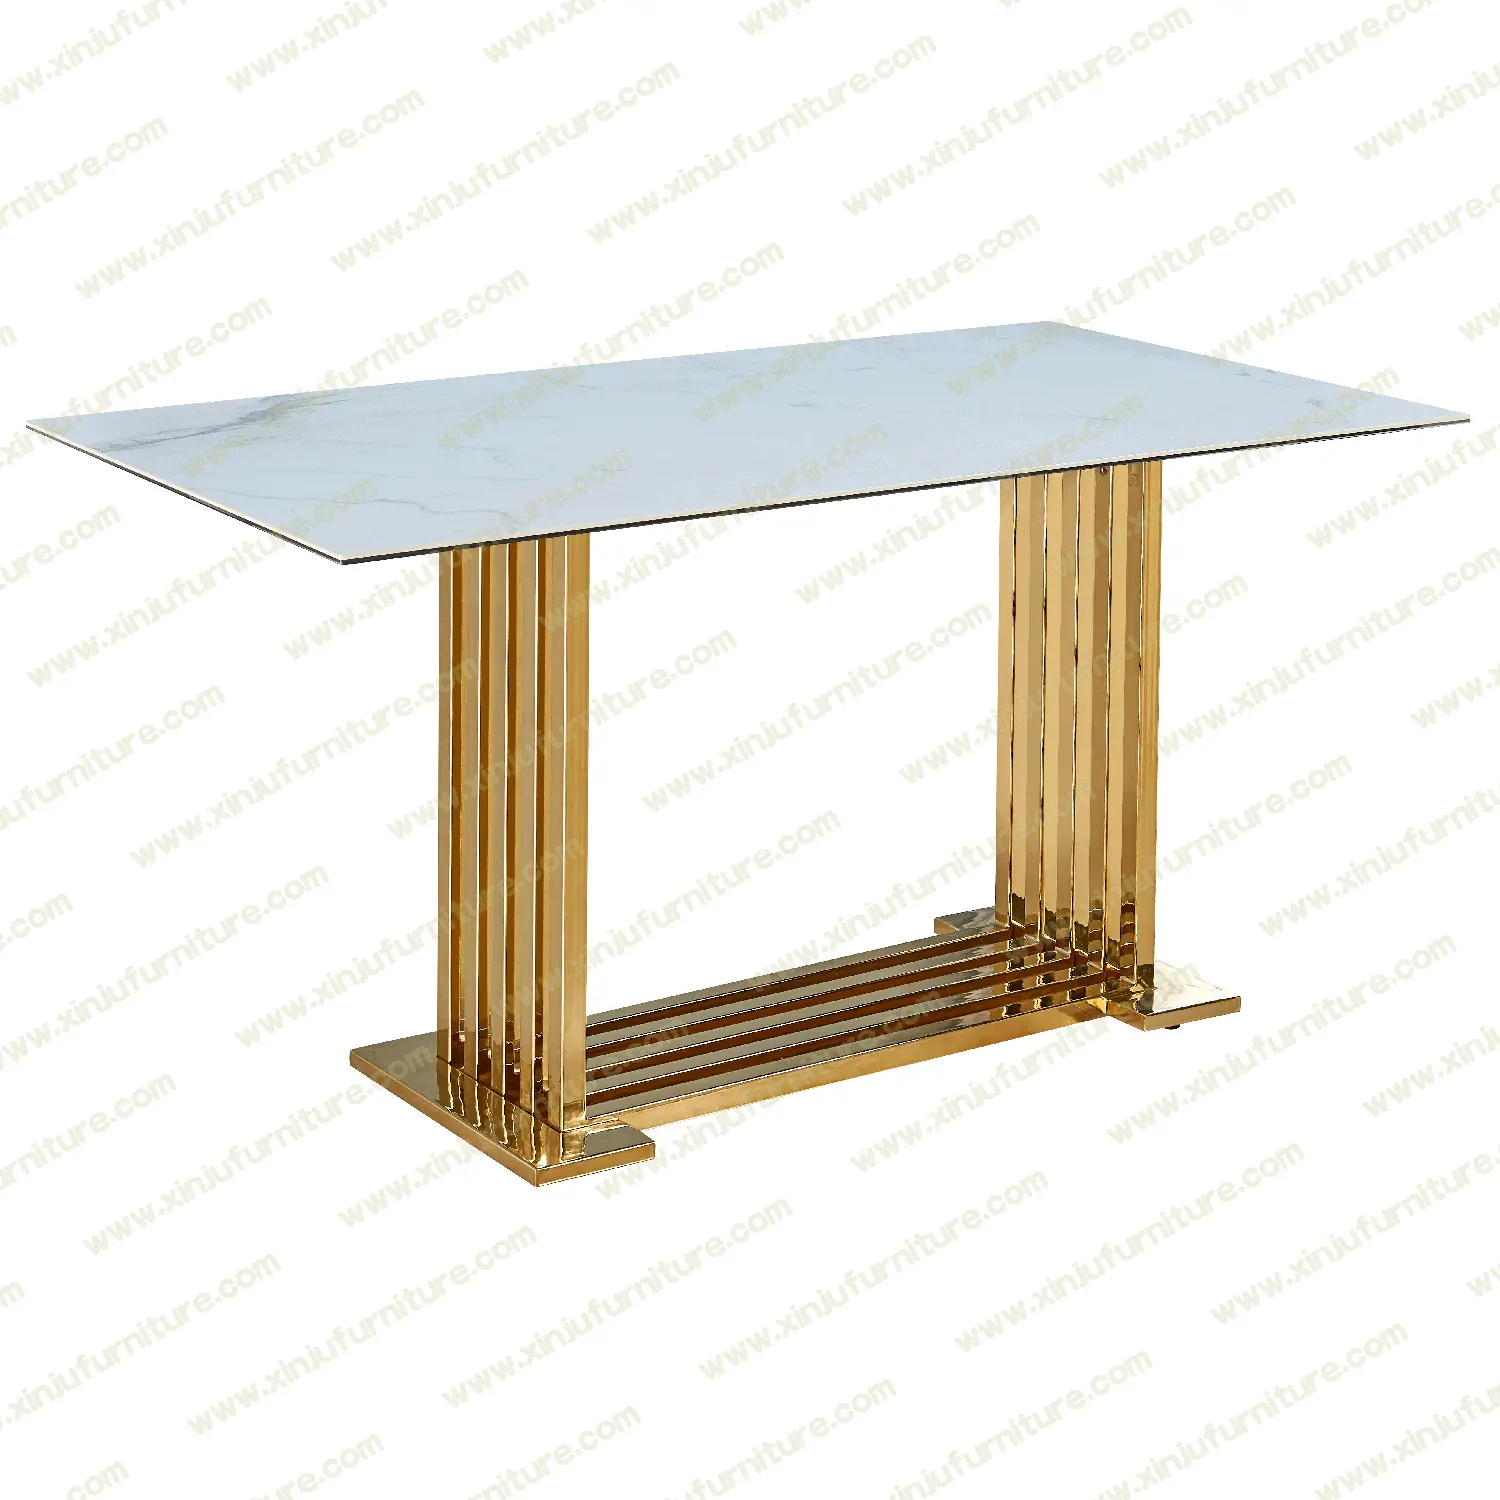 Marble surface of dining table for restaurant